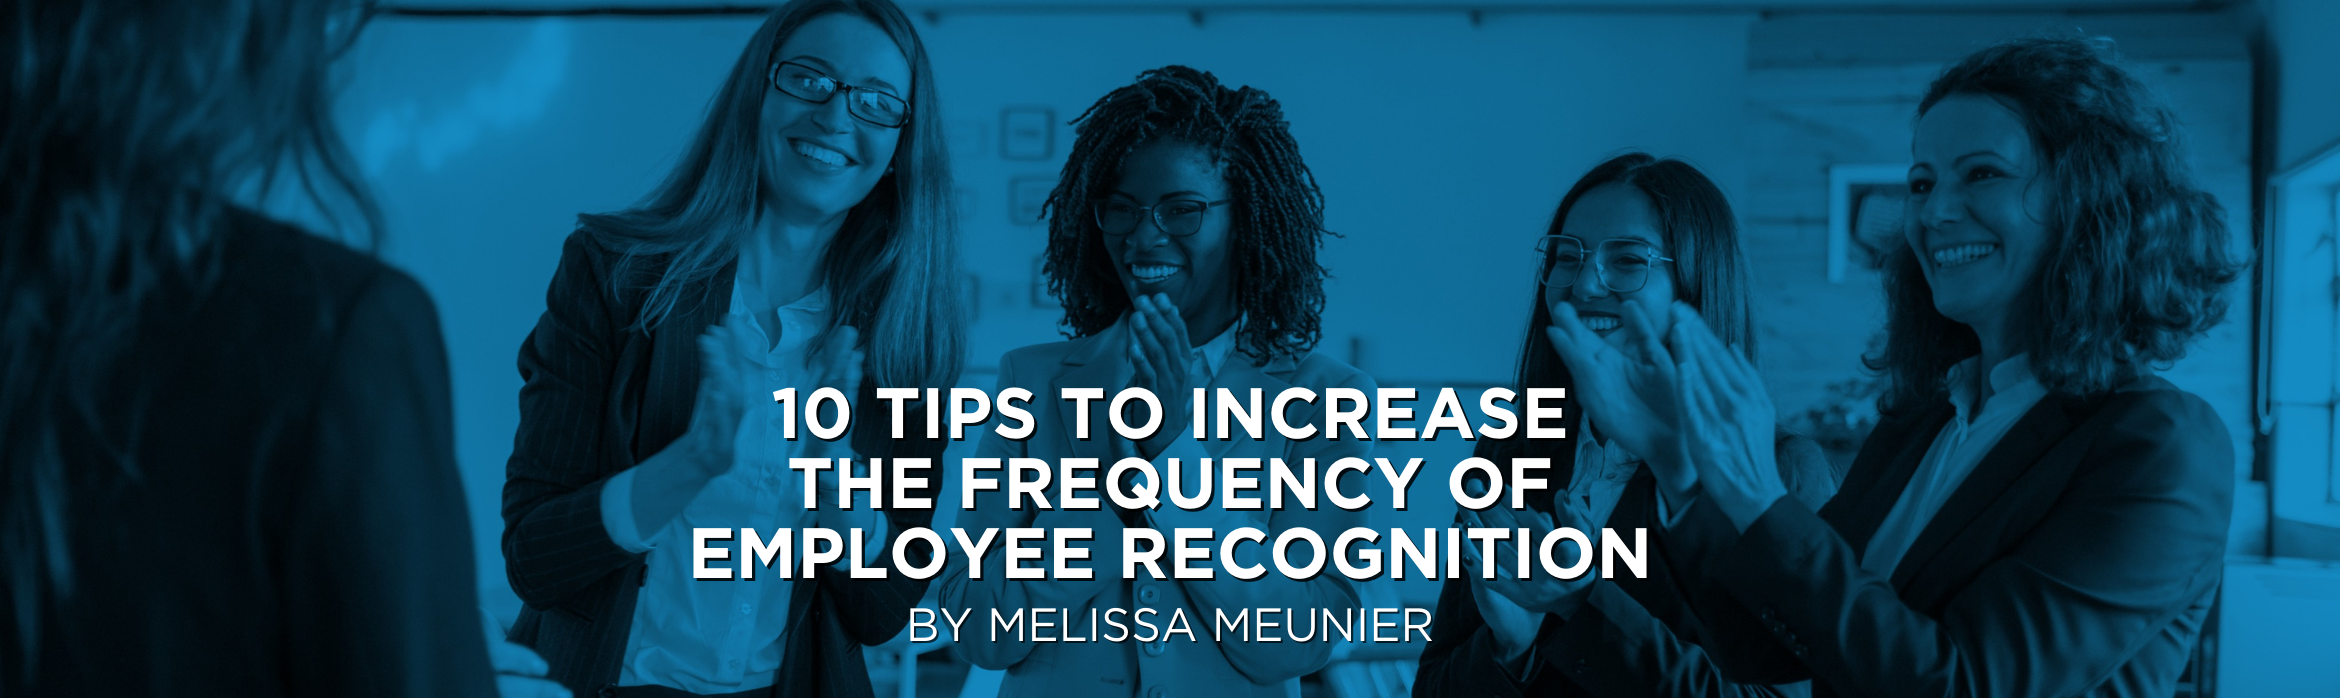 10 Tips to Increase the Frequency of Employee Recognition